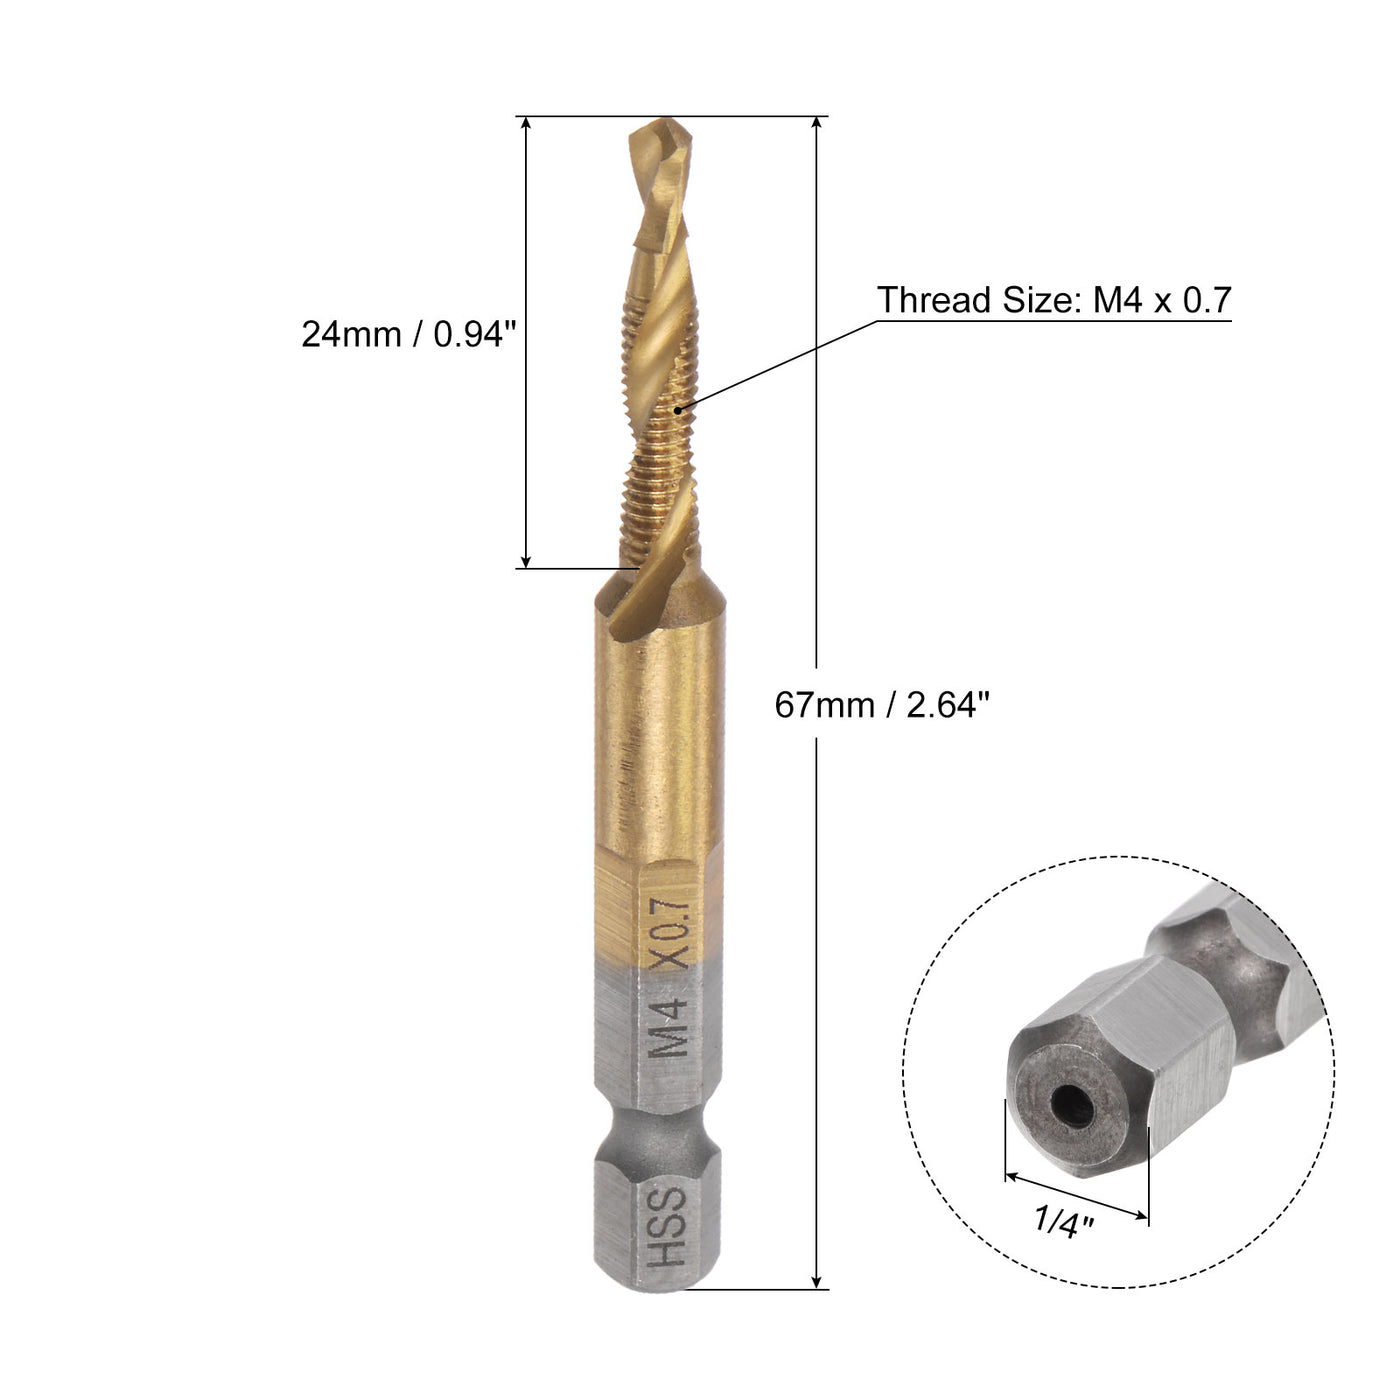 Uxcell Uxcell M5x0.8 Titanium Coated High Speed Steel Combination Drill and Tap Bit Long